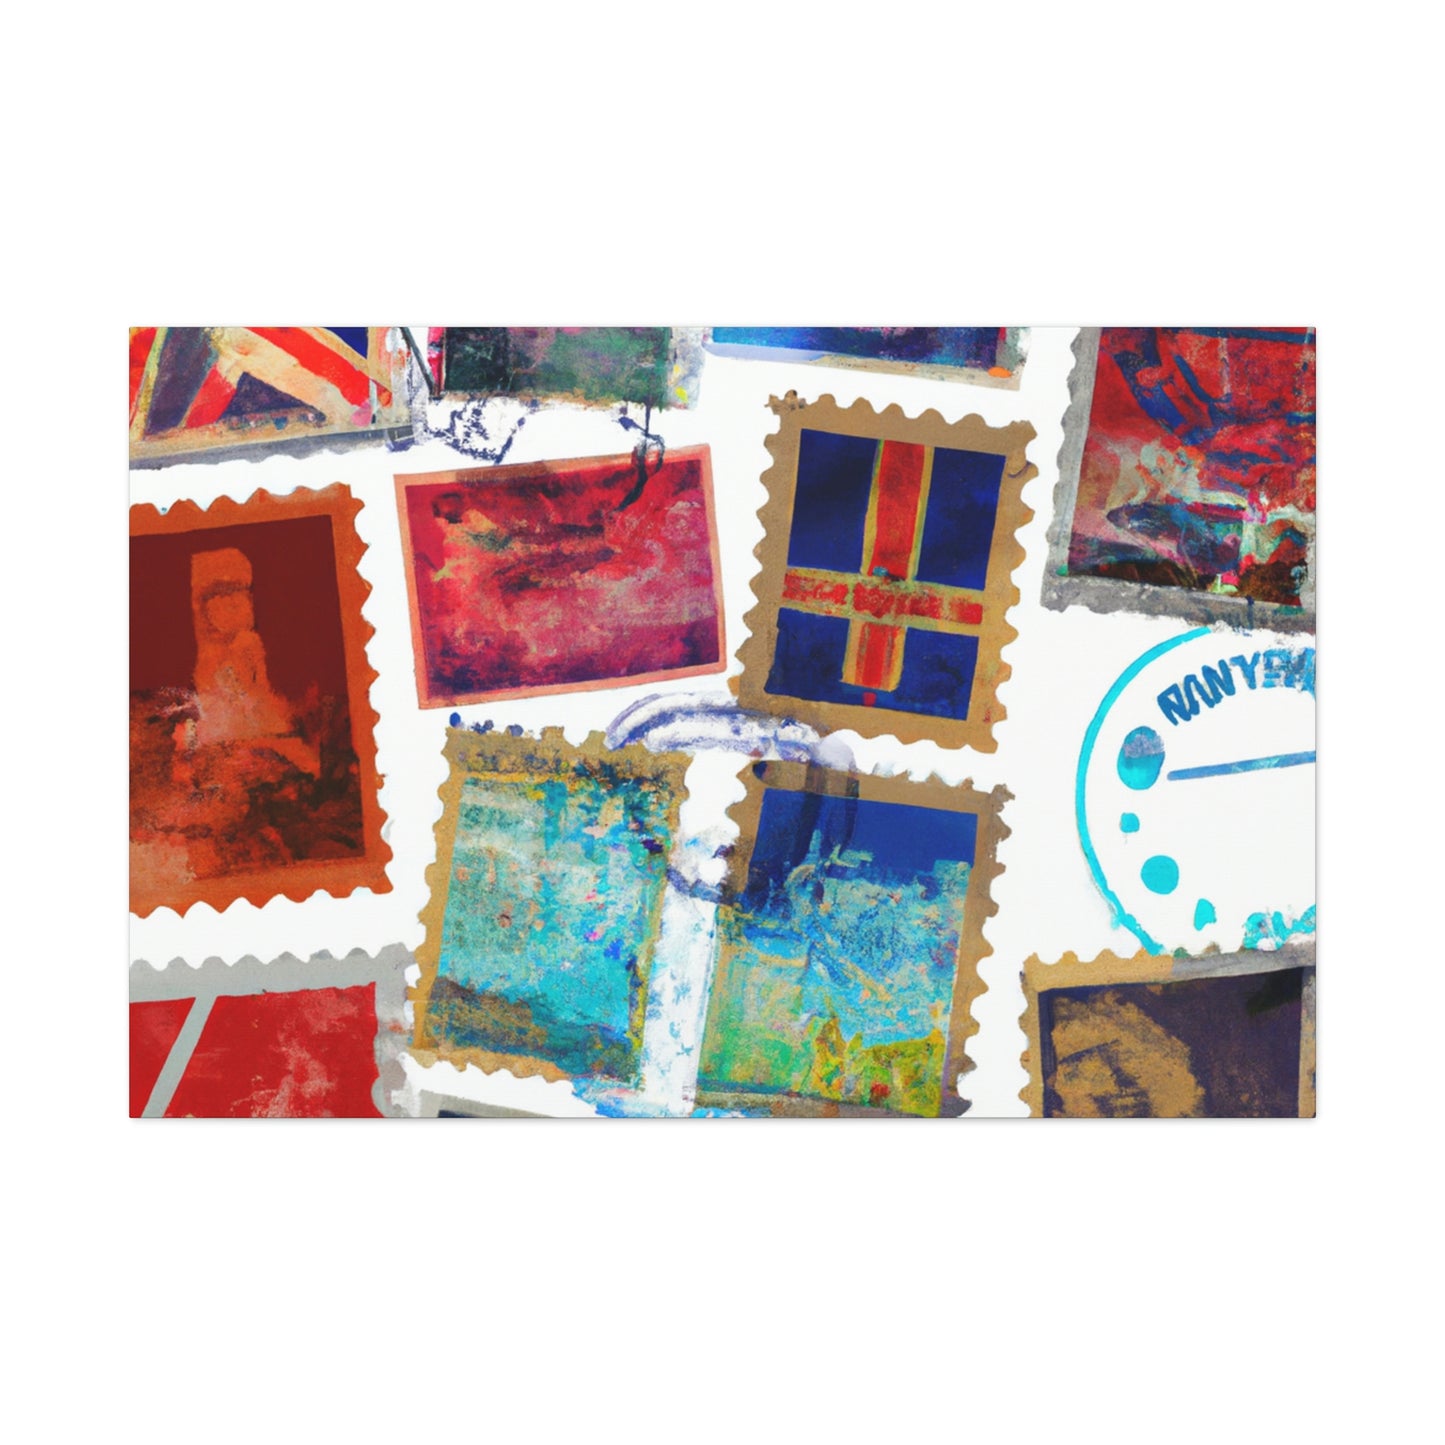 "Exploring Our World" Stamp Collection - Canvas